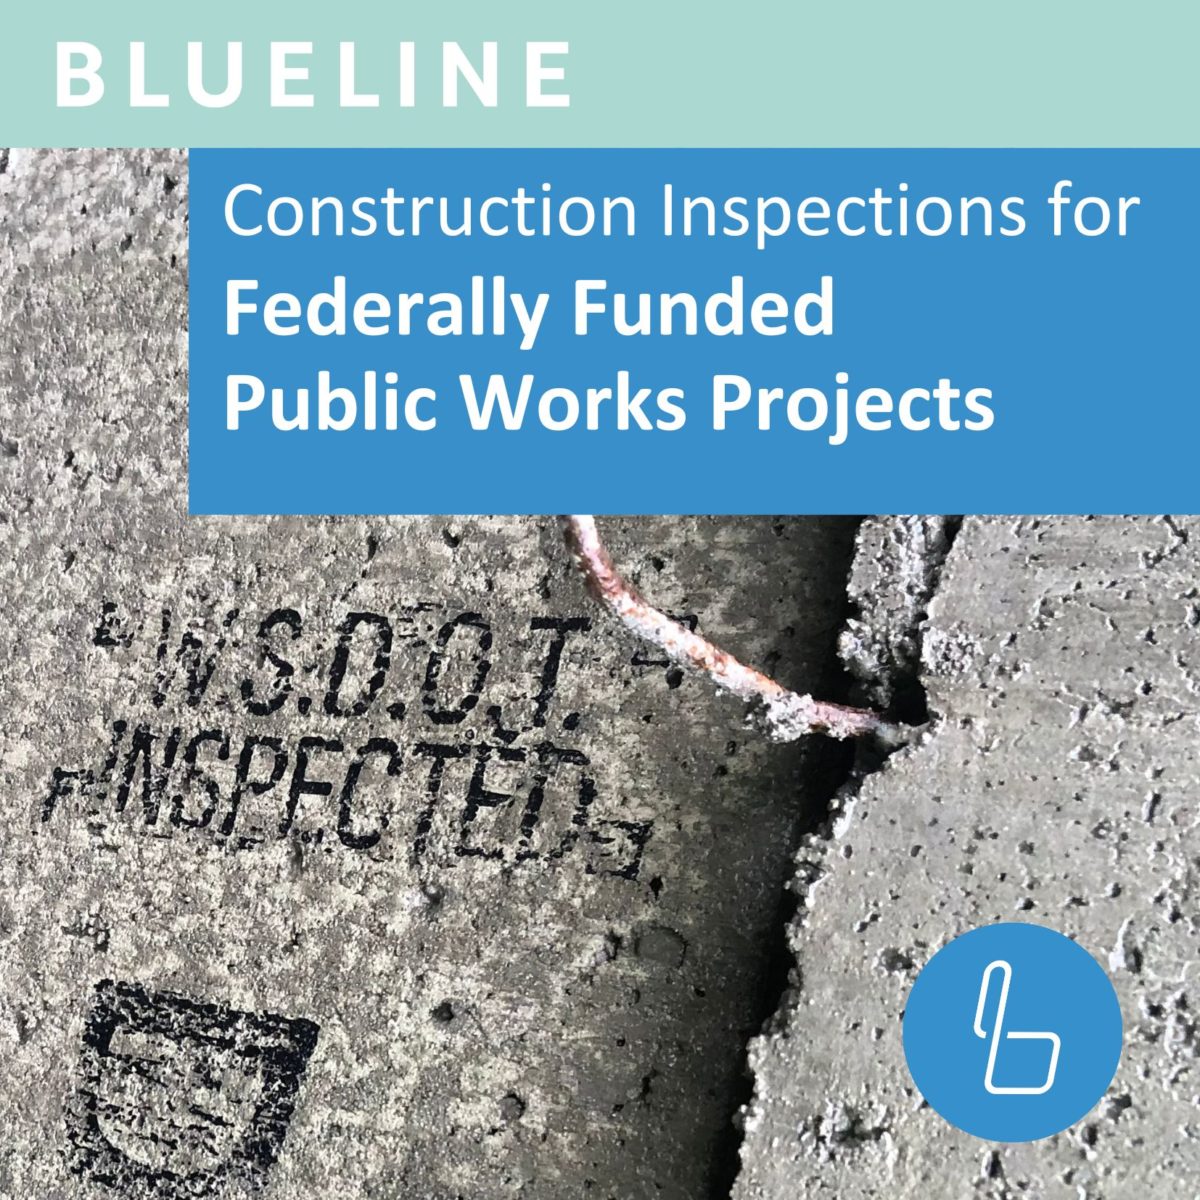 Construction Inspections for Federally Funded Public Works Projects